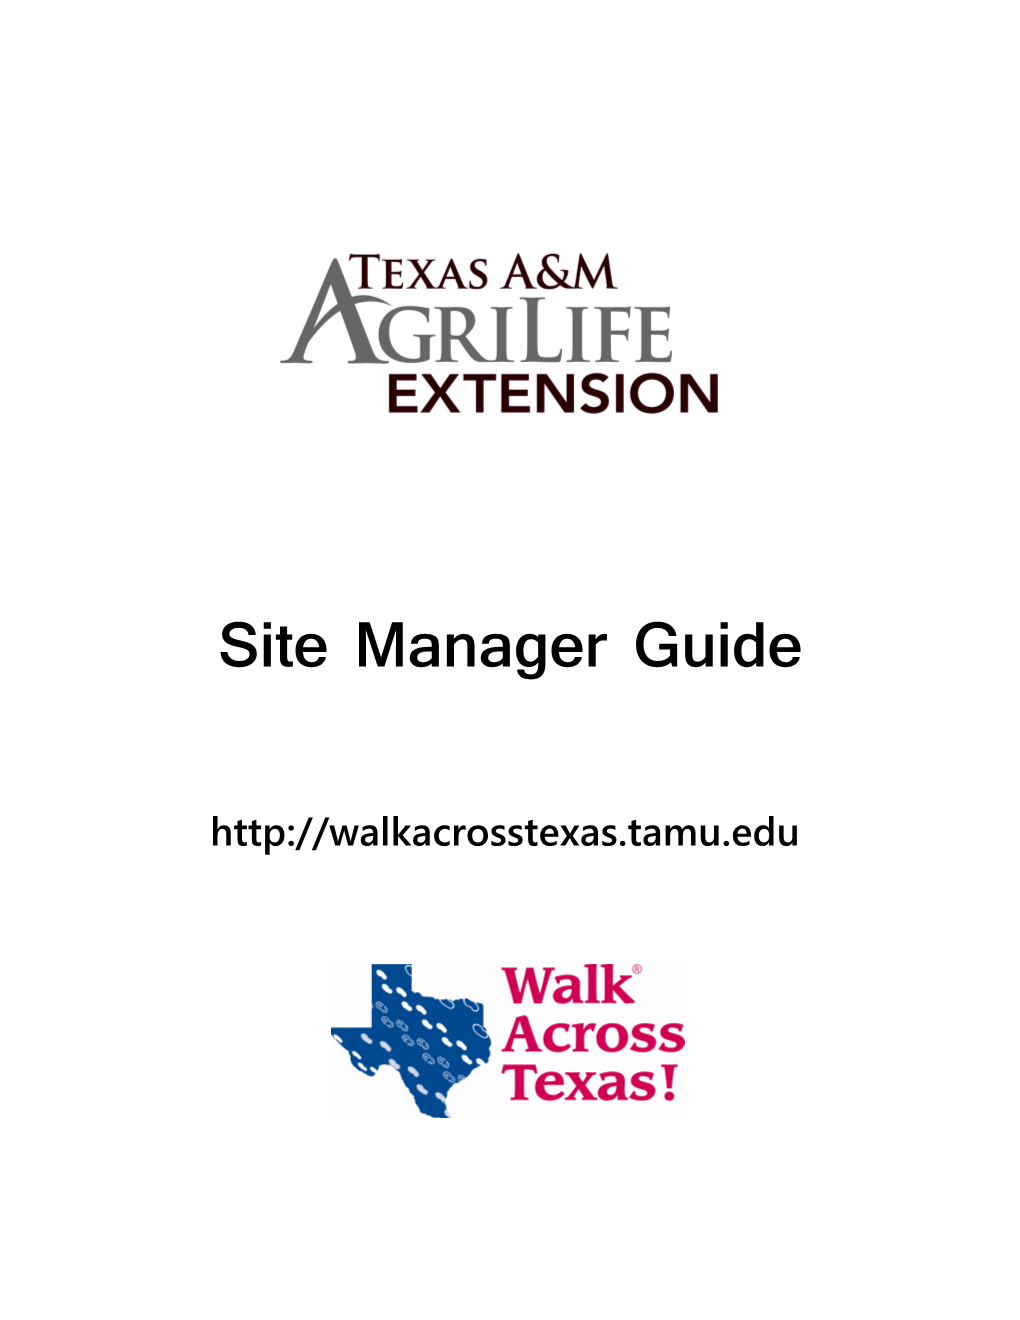 Walk Across Texas! Site Manager Guide